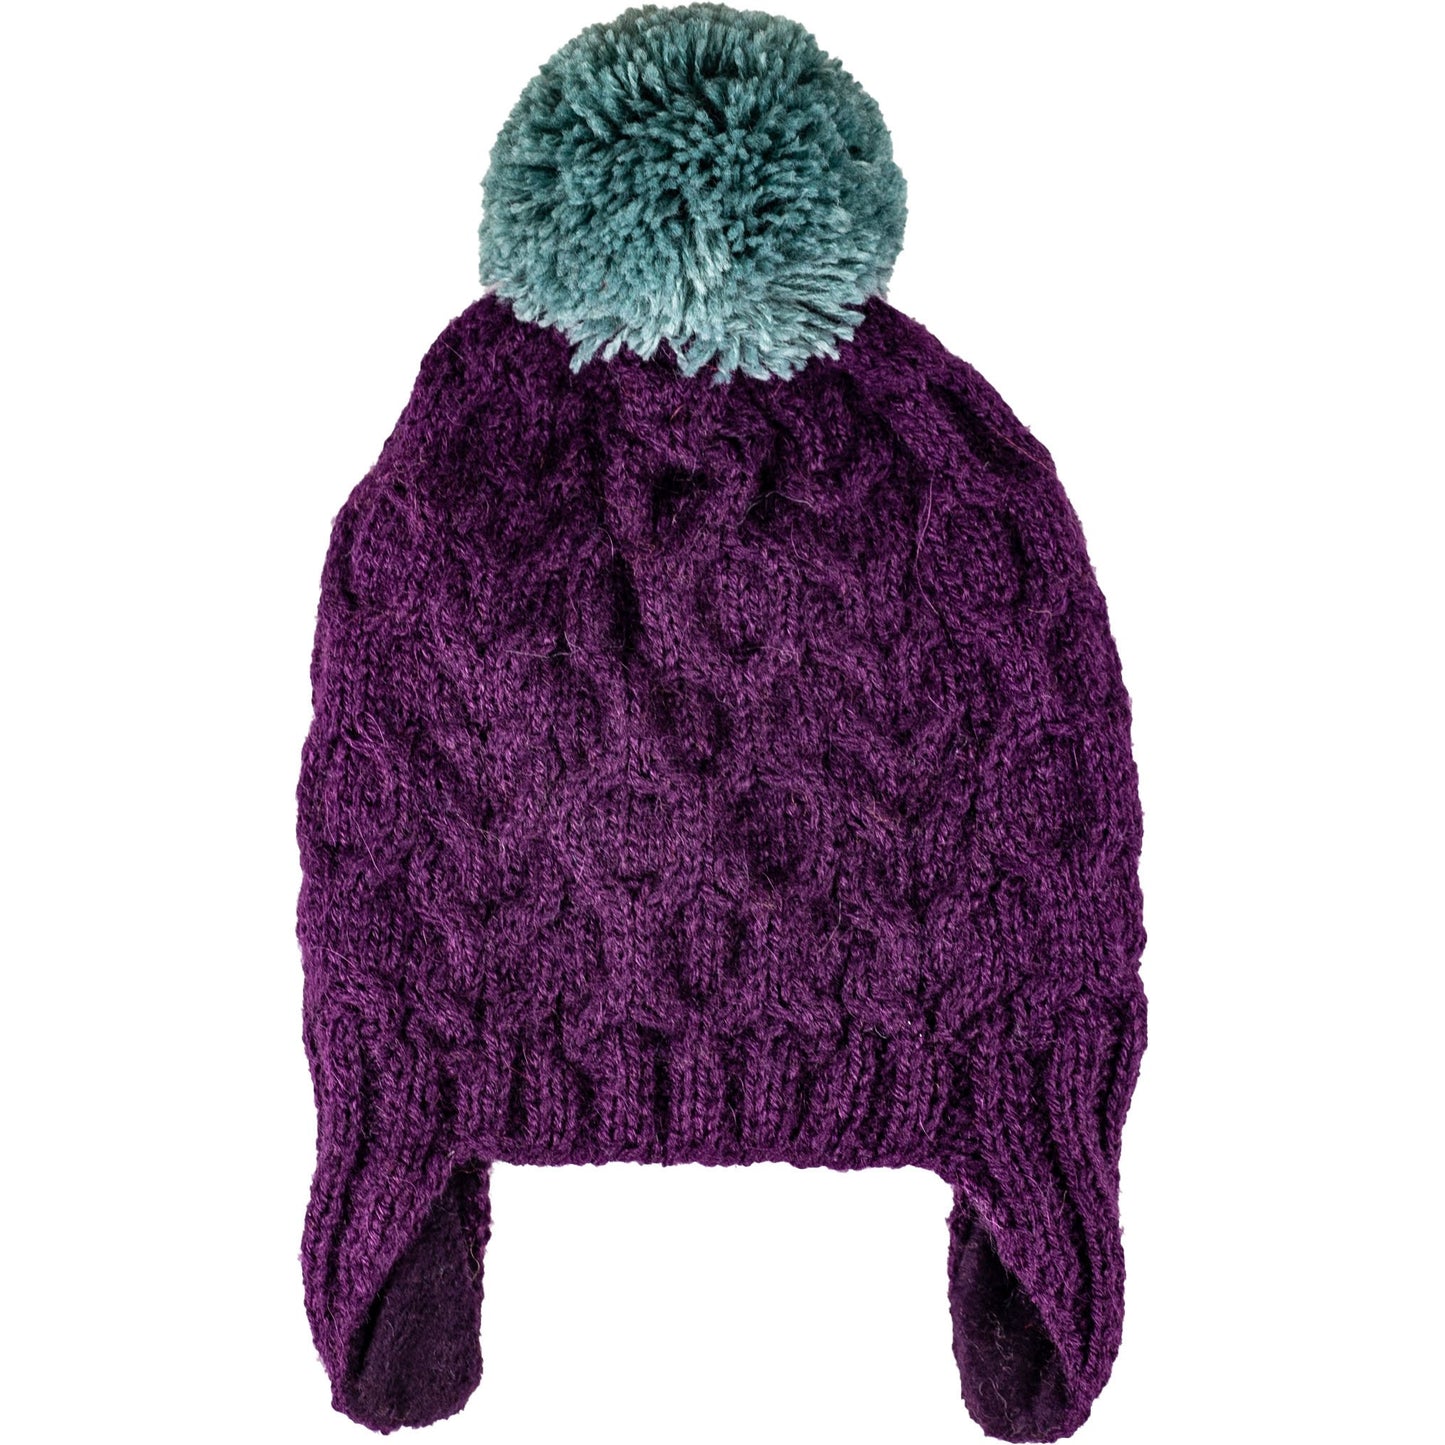 Purple Cable Hat with Blue Pompom